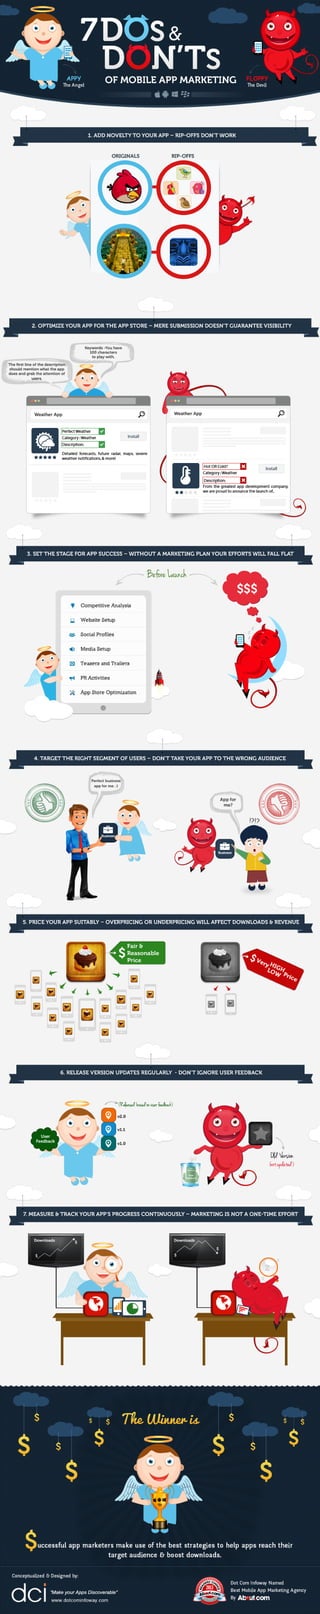 Mobile Apps Marketing Infographic - 7 do's and dont's of mobile apps marketing